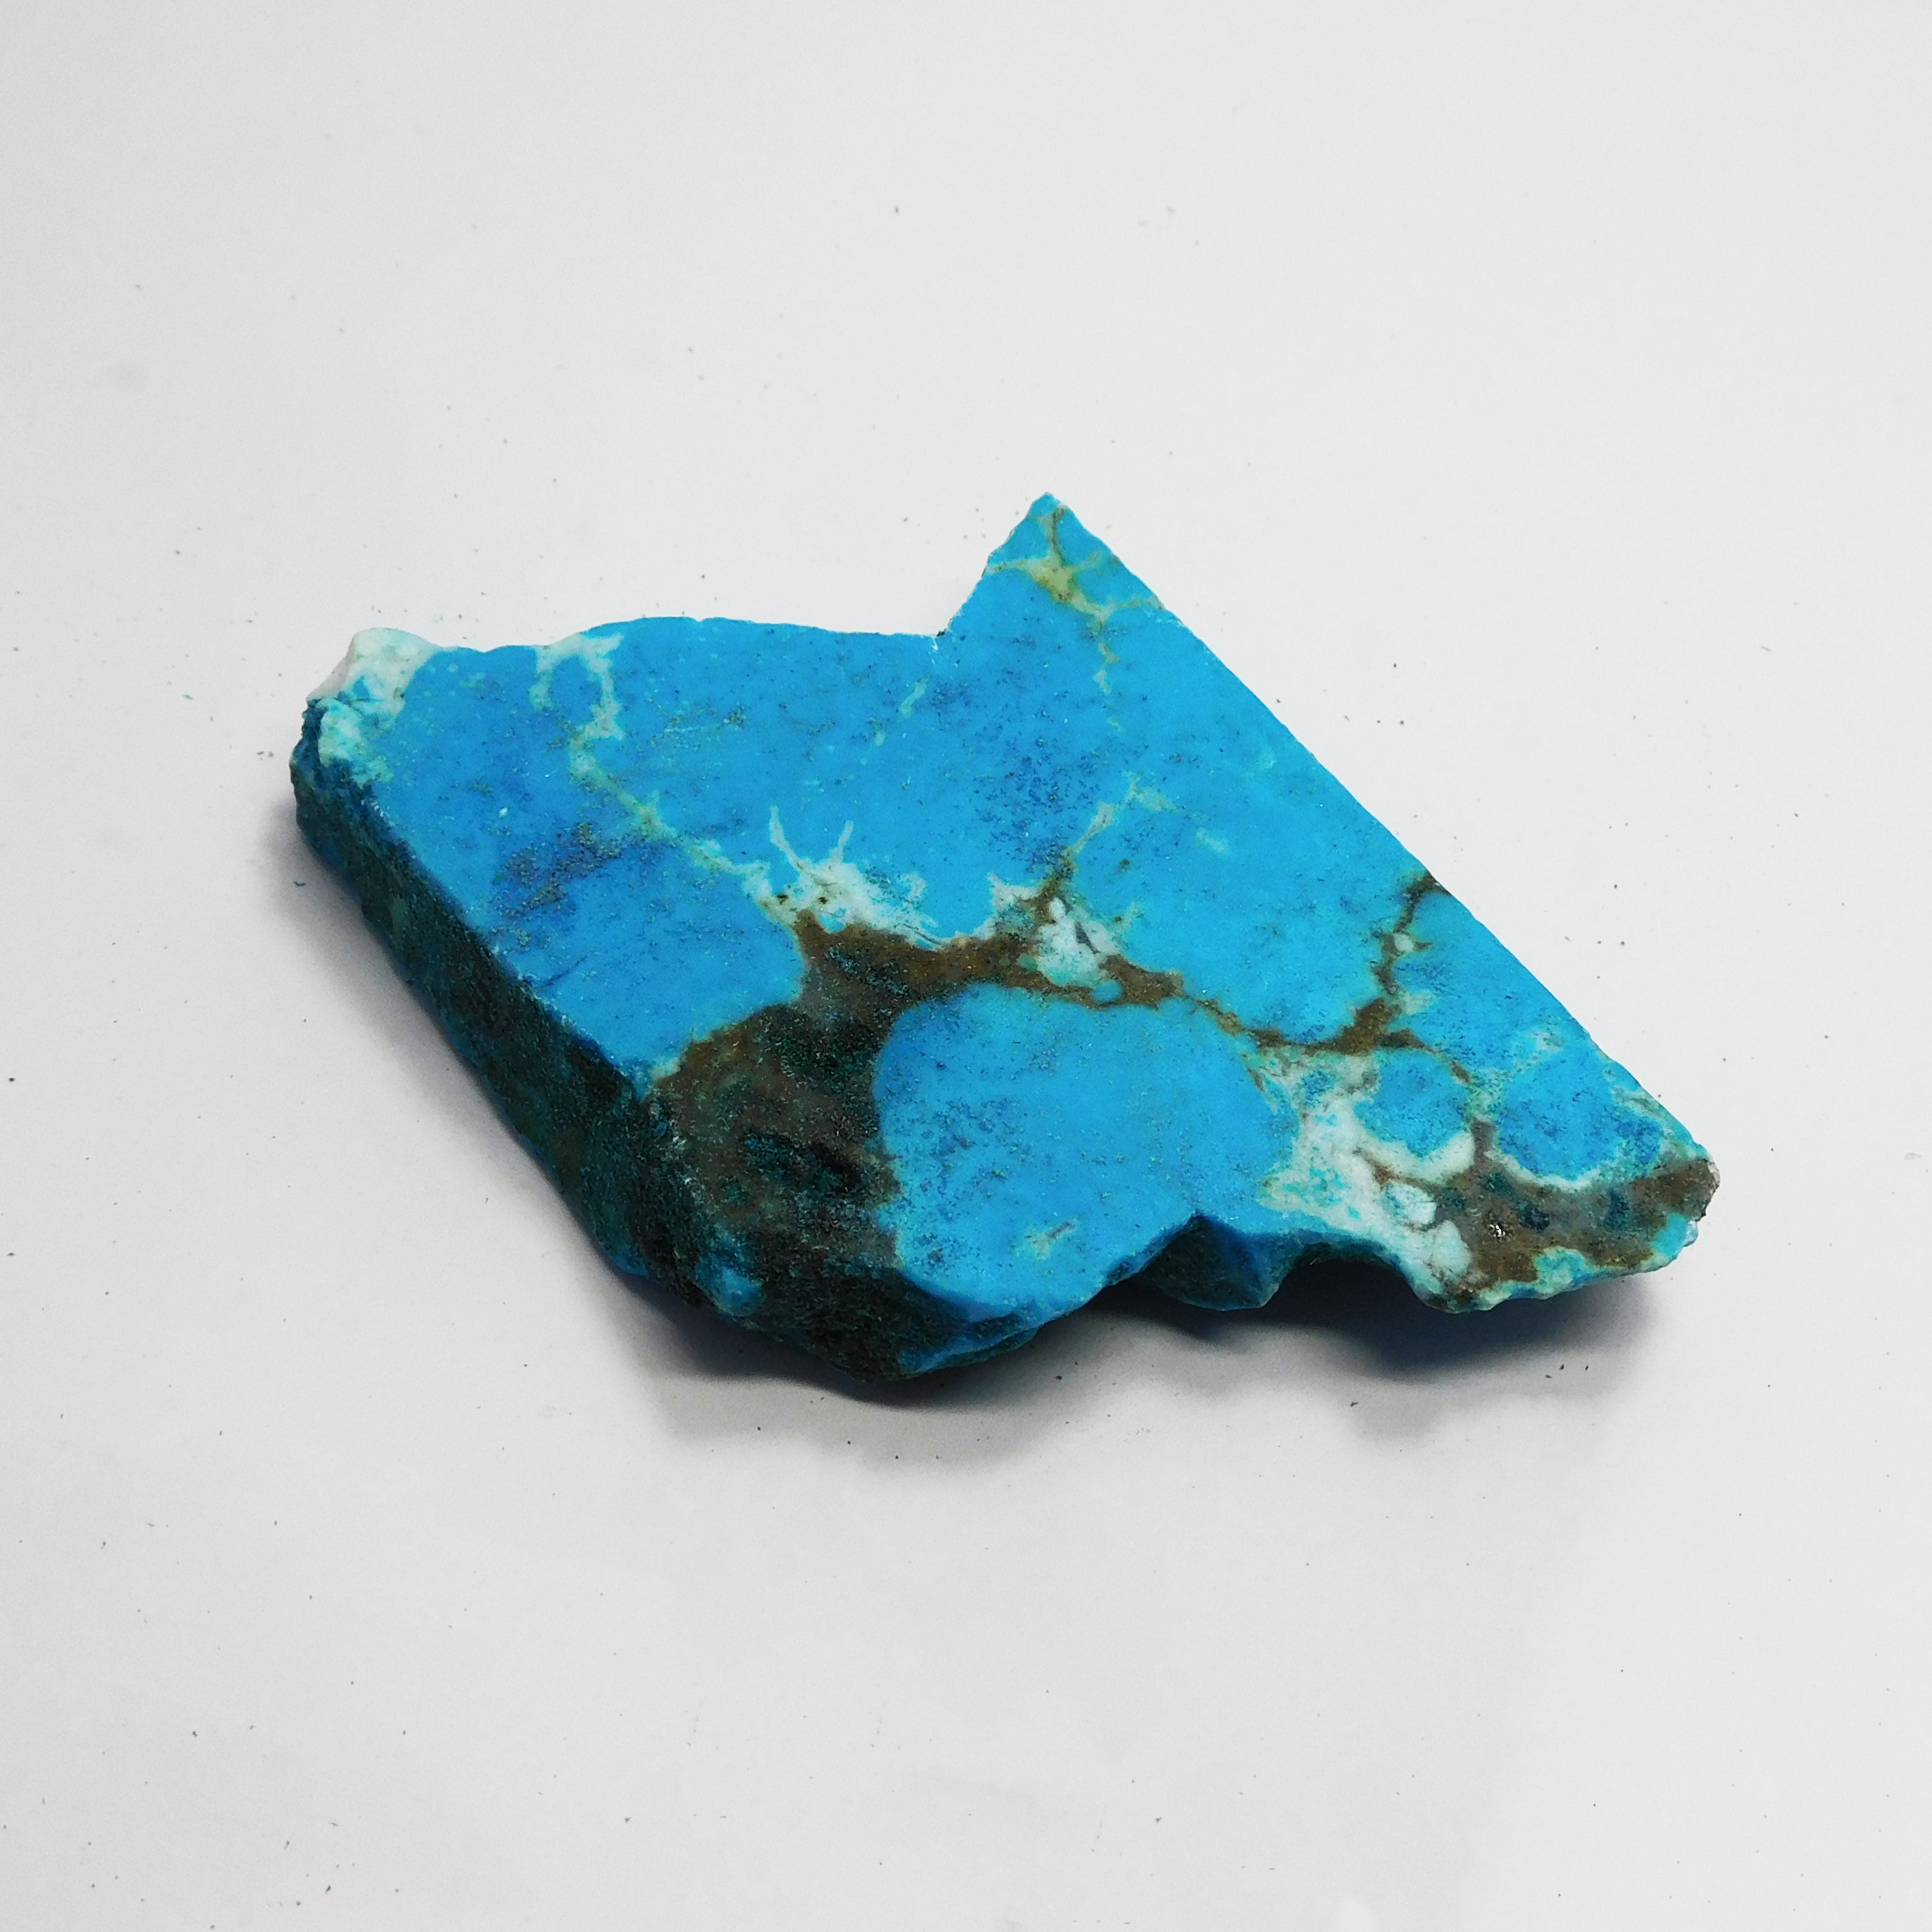 384.90 Carat Uncut Raw Natural Blue Turquoise Rough Loose Gemstone CERTIFIED | On Sale | Best Price